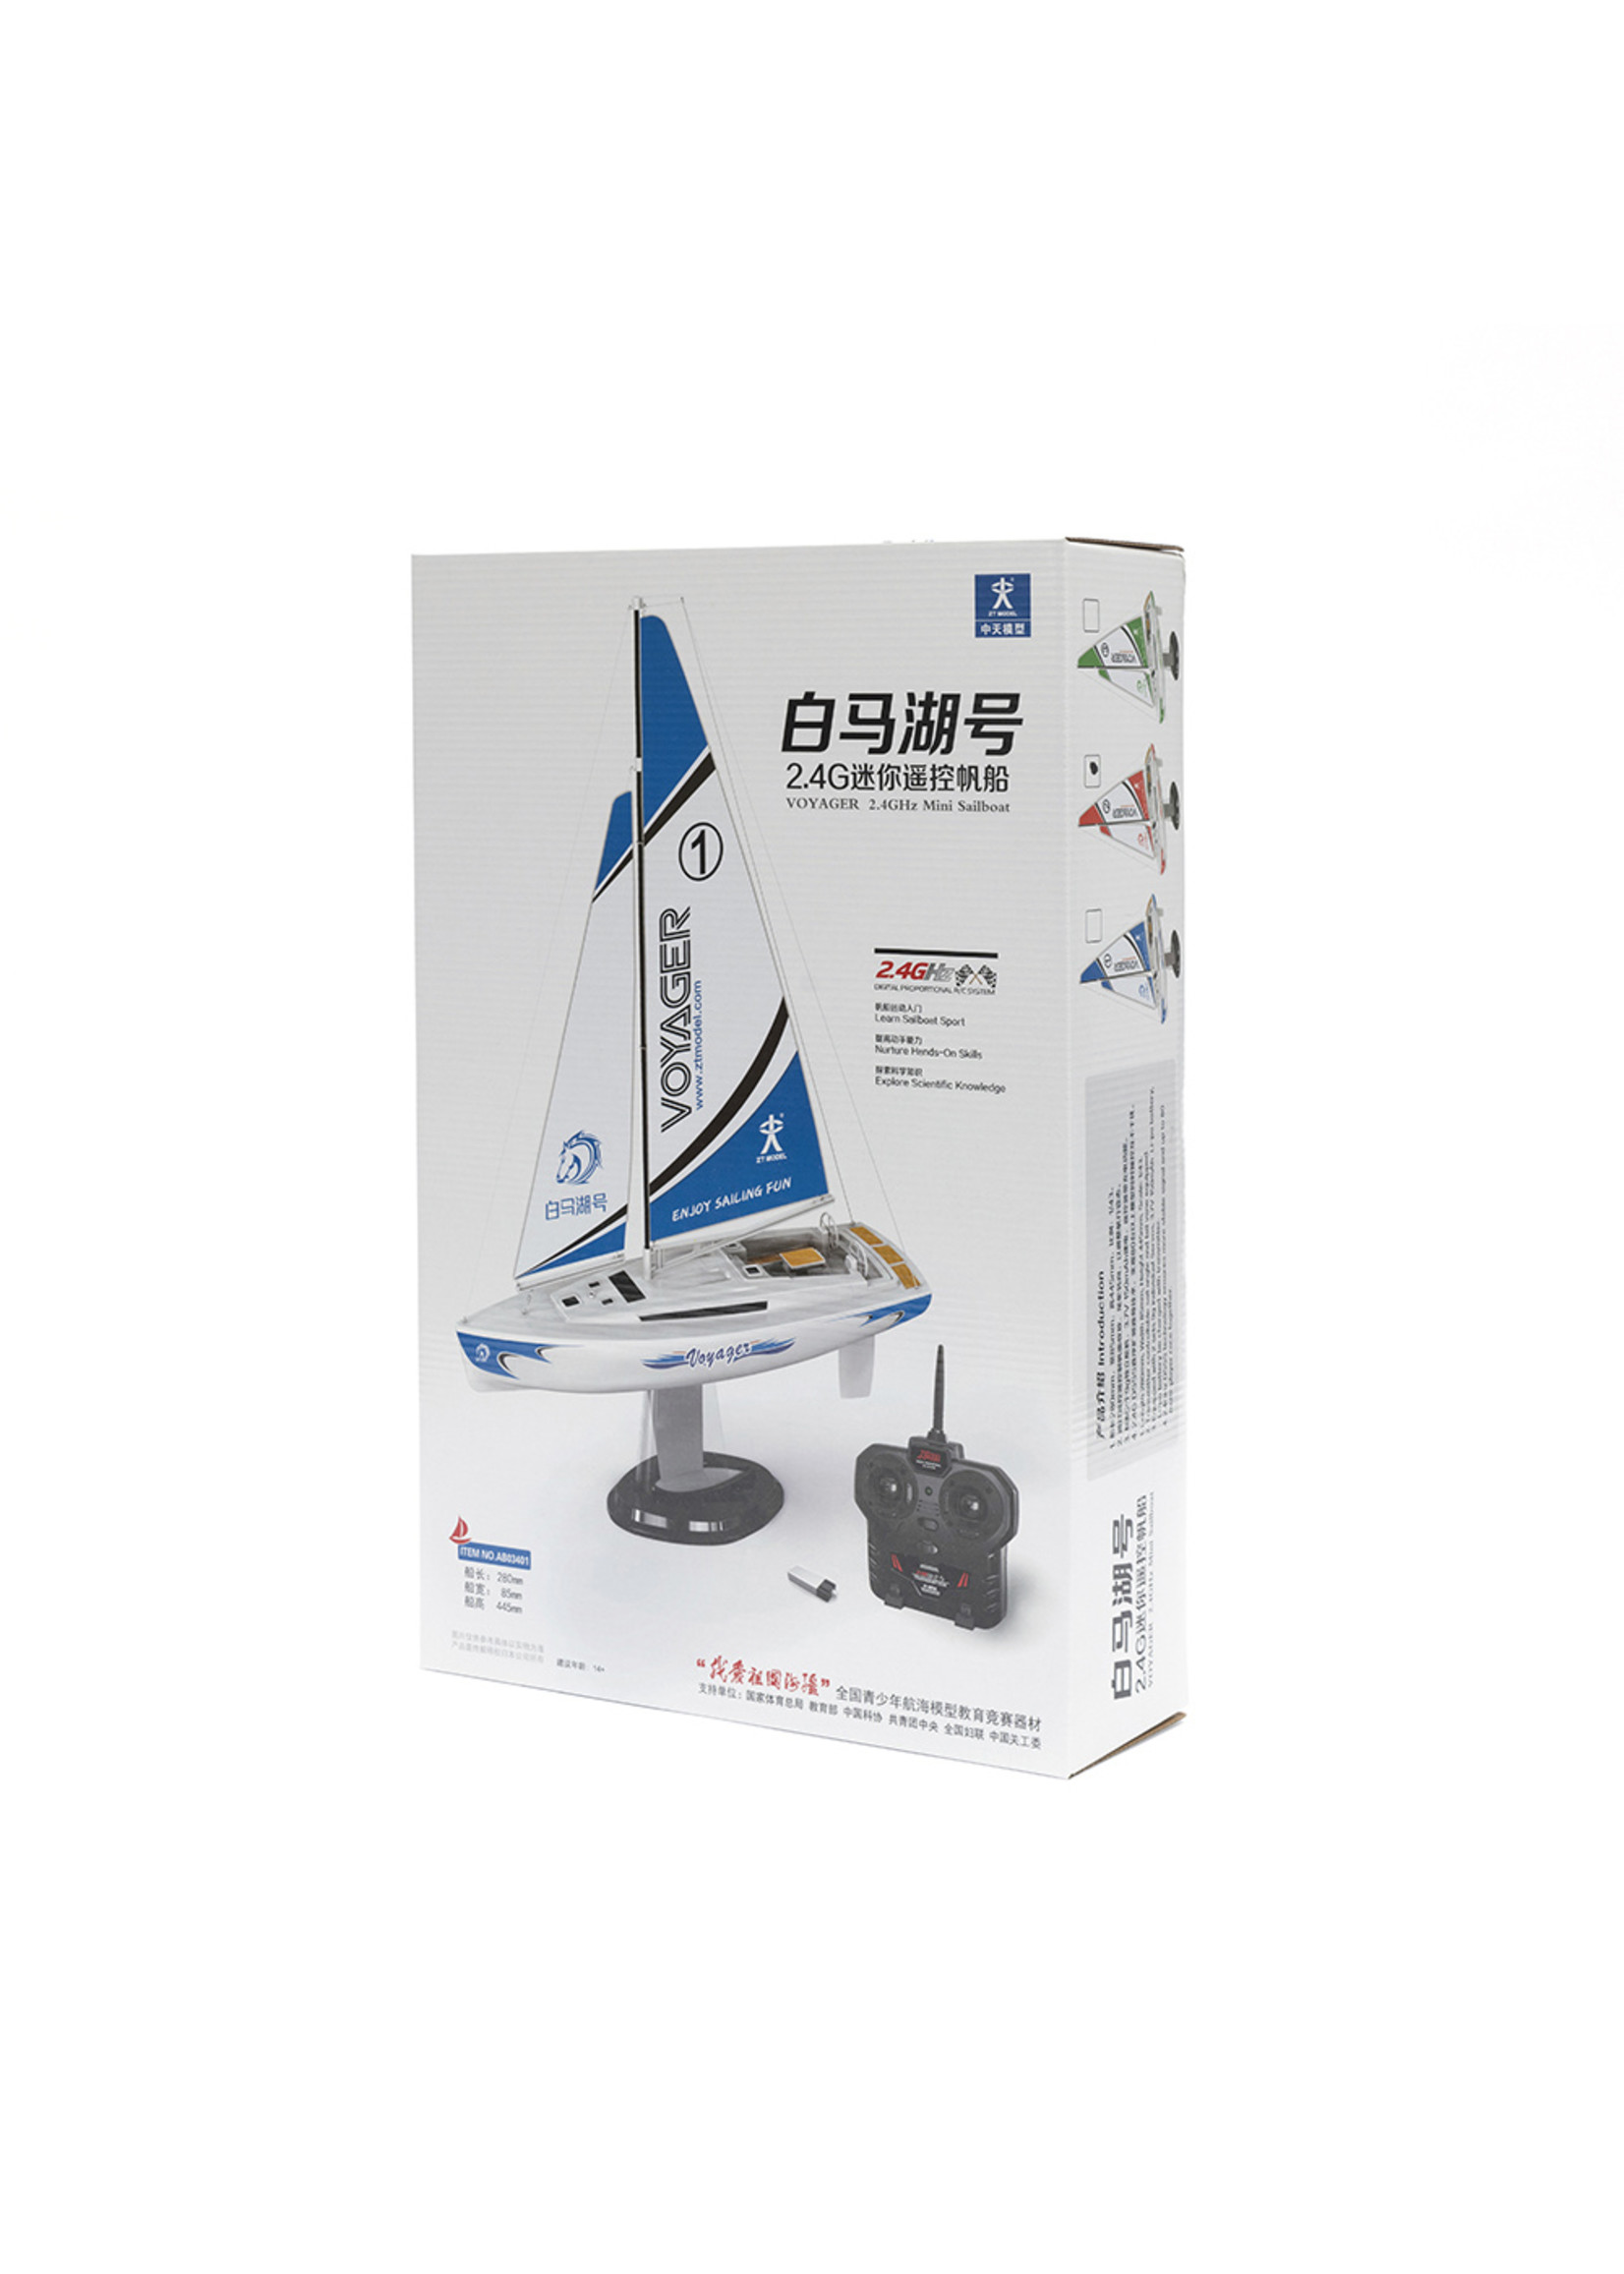 Play Steam Voyager 280 Wind-Power RC Sailboat - Red